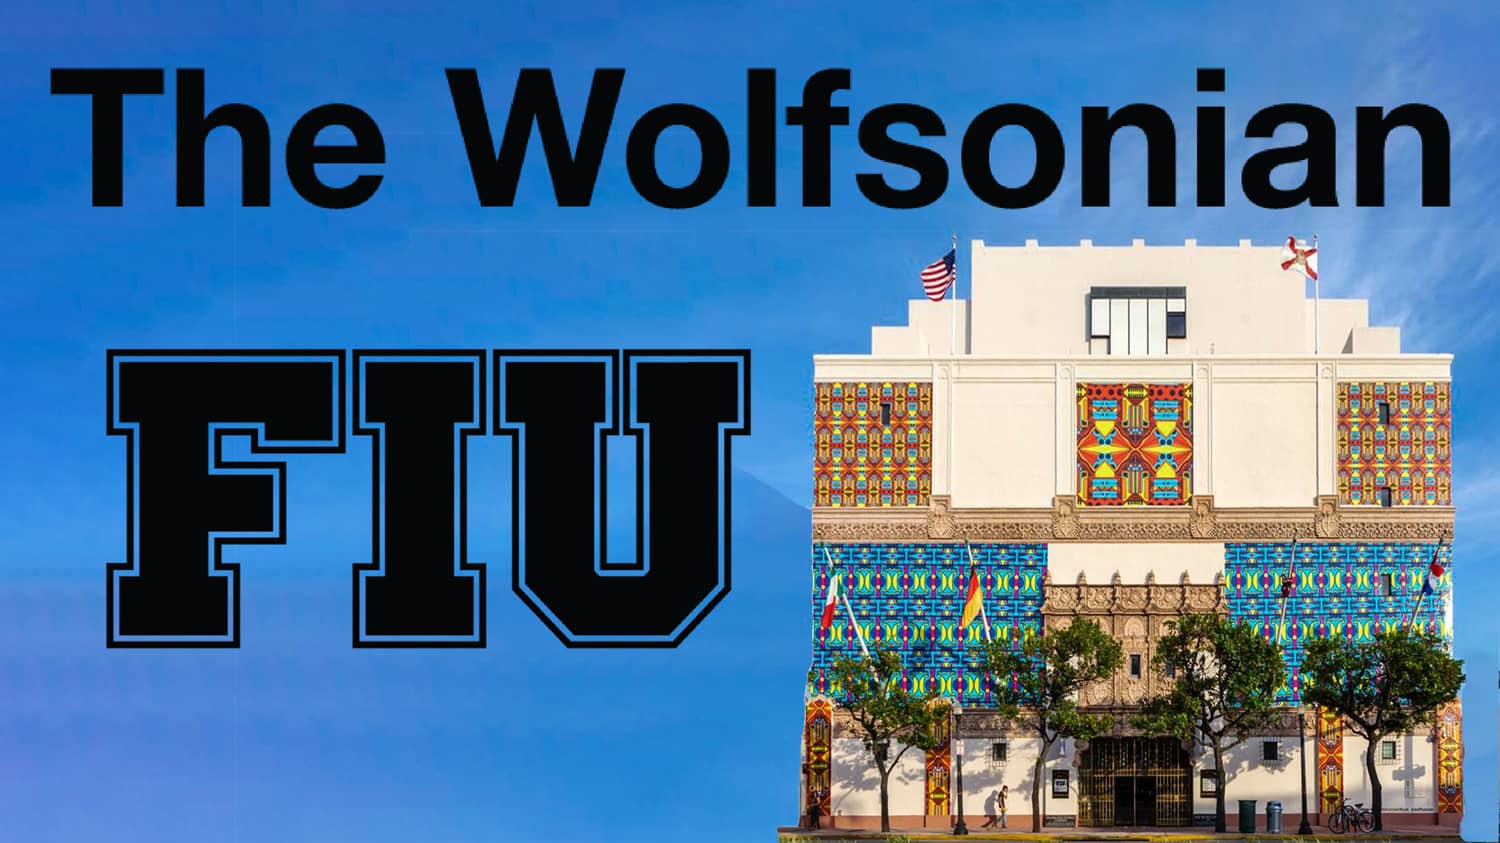 Miami Museums The Wolfsonian